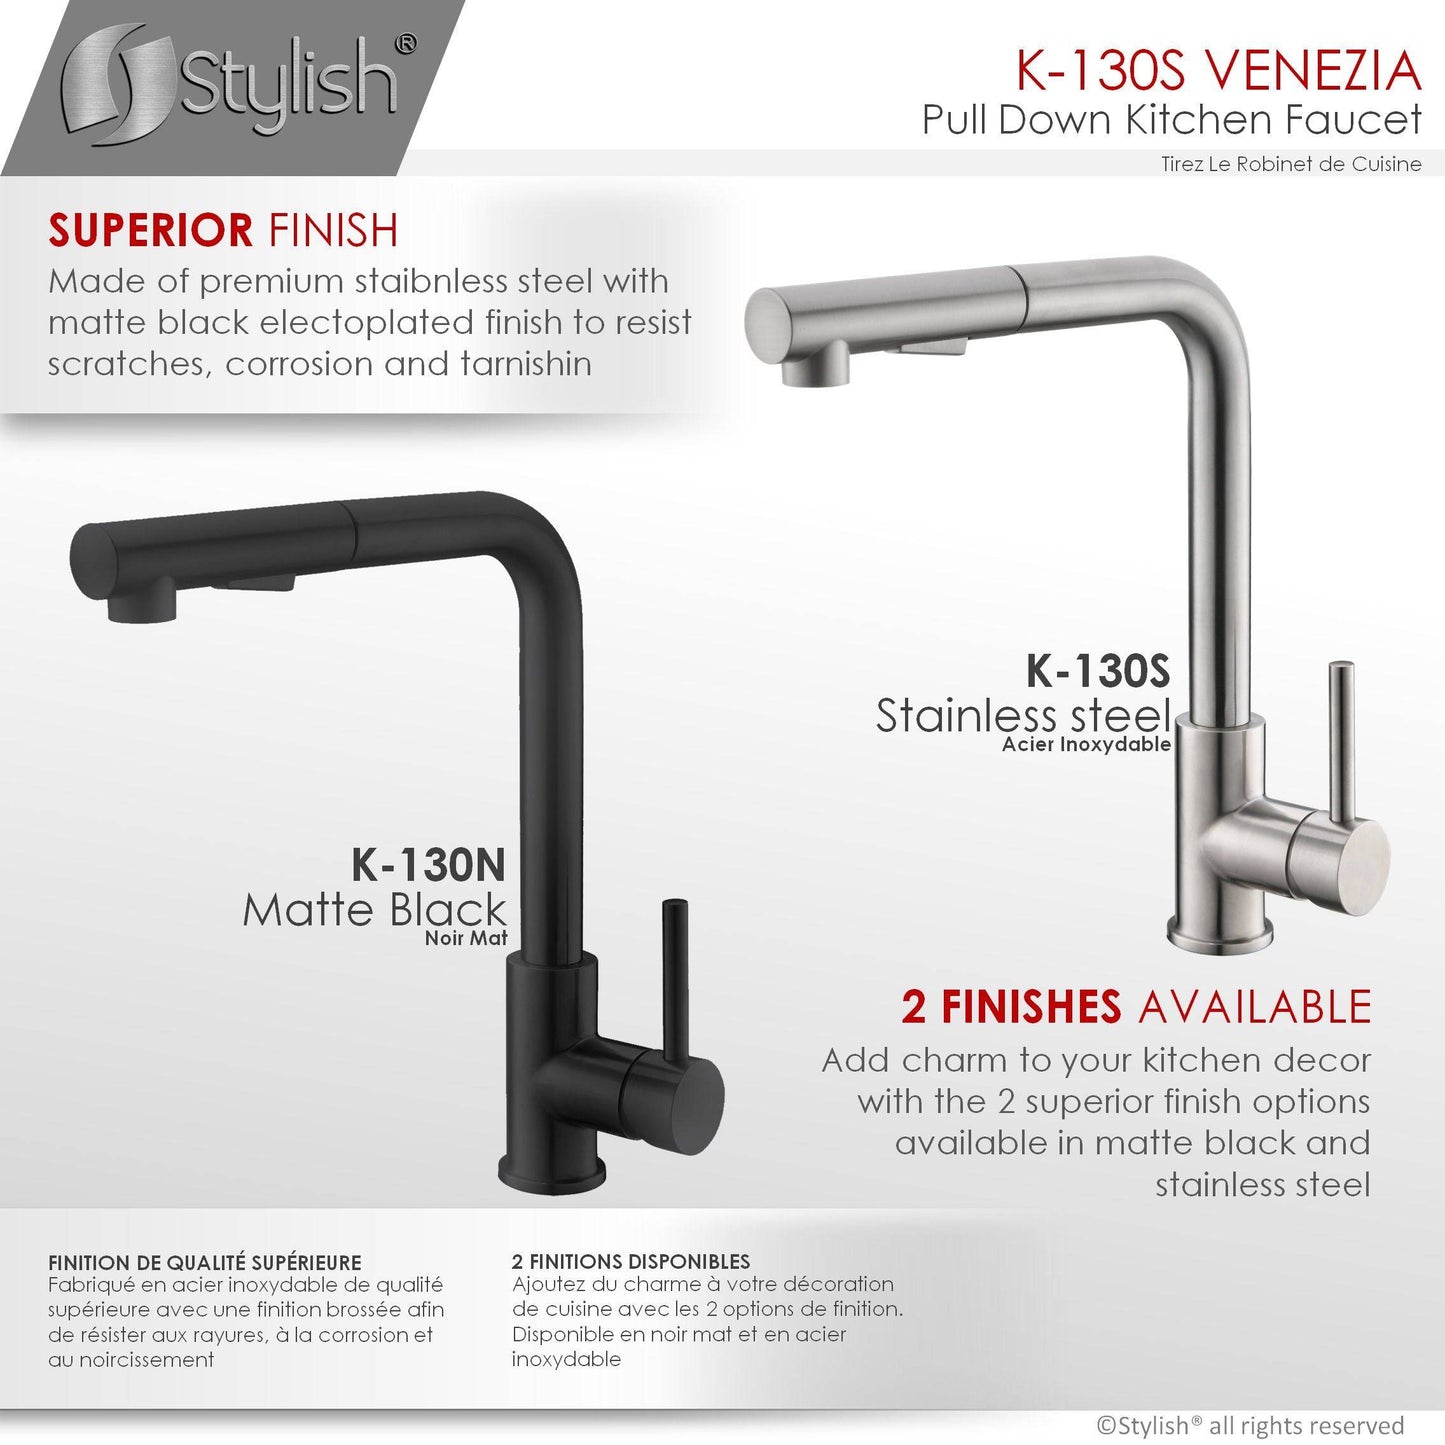 Stylish Venezia 12" Kitchen Faucet Single Handle Pull Down Dual Mode Stainless Steel, Brushed Finish K-130S